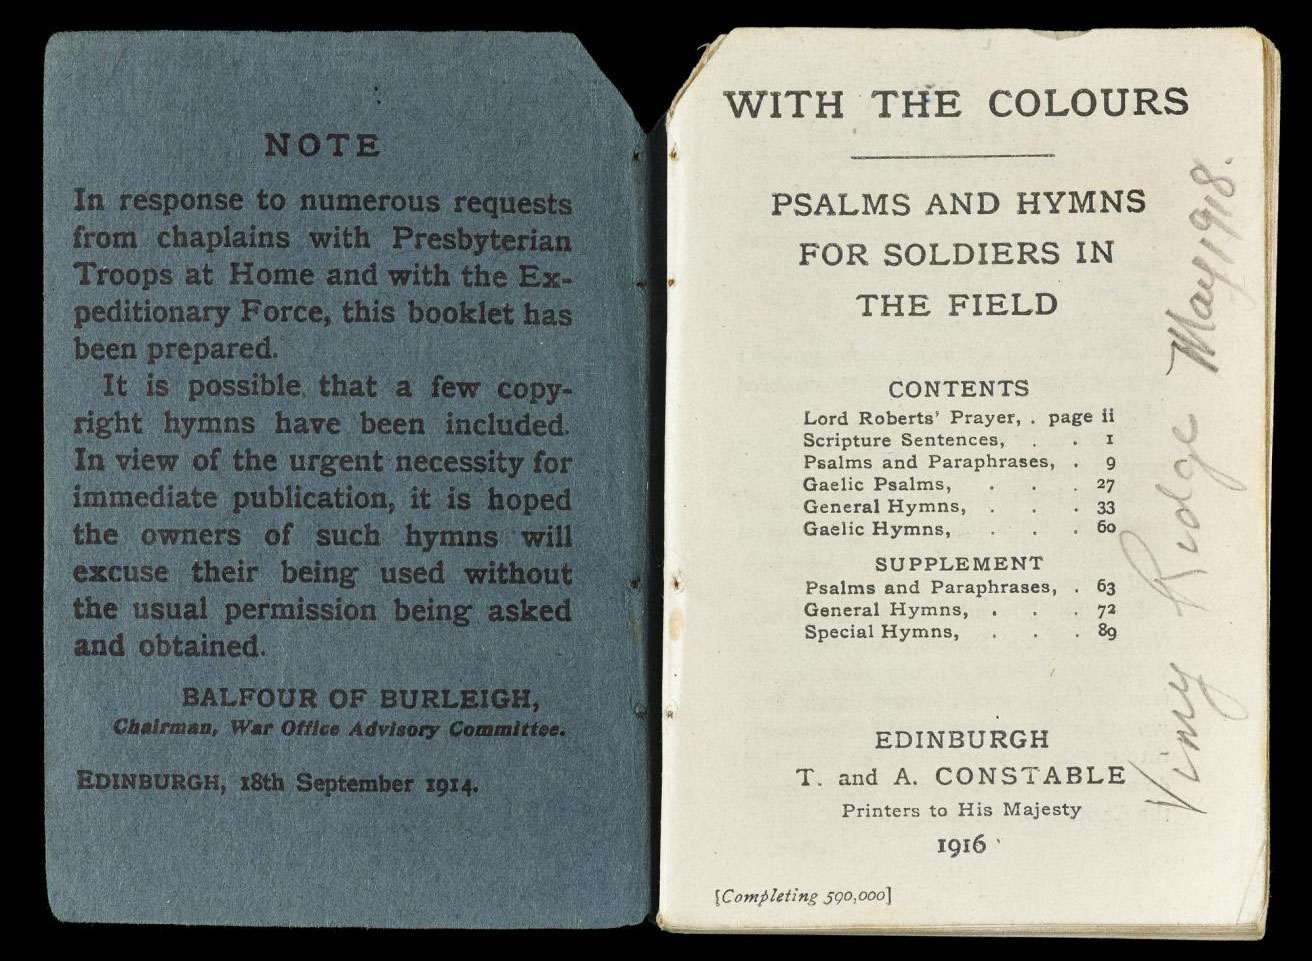 Book of psalms and hymns printed for soldiers by the Church of Scotland, belonging to Archibald Sneddon, 10th Battalion Cameronians.